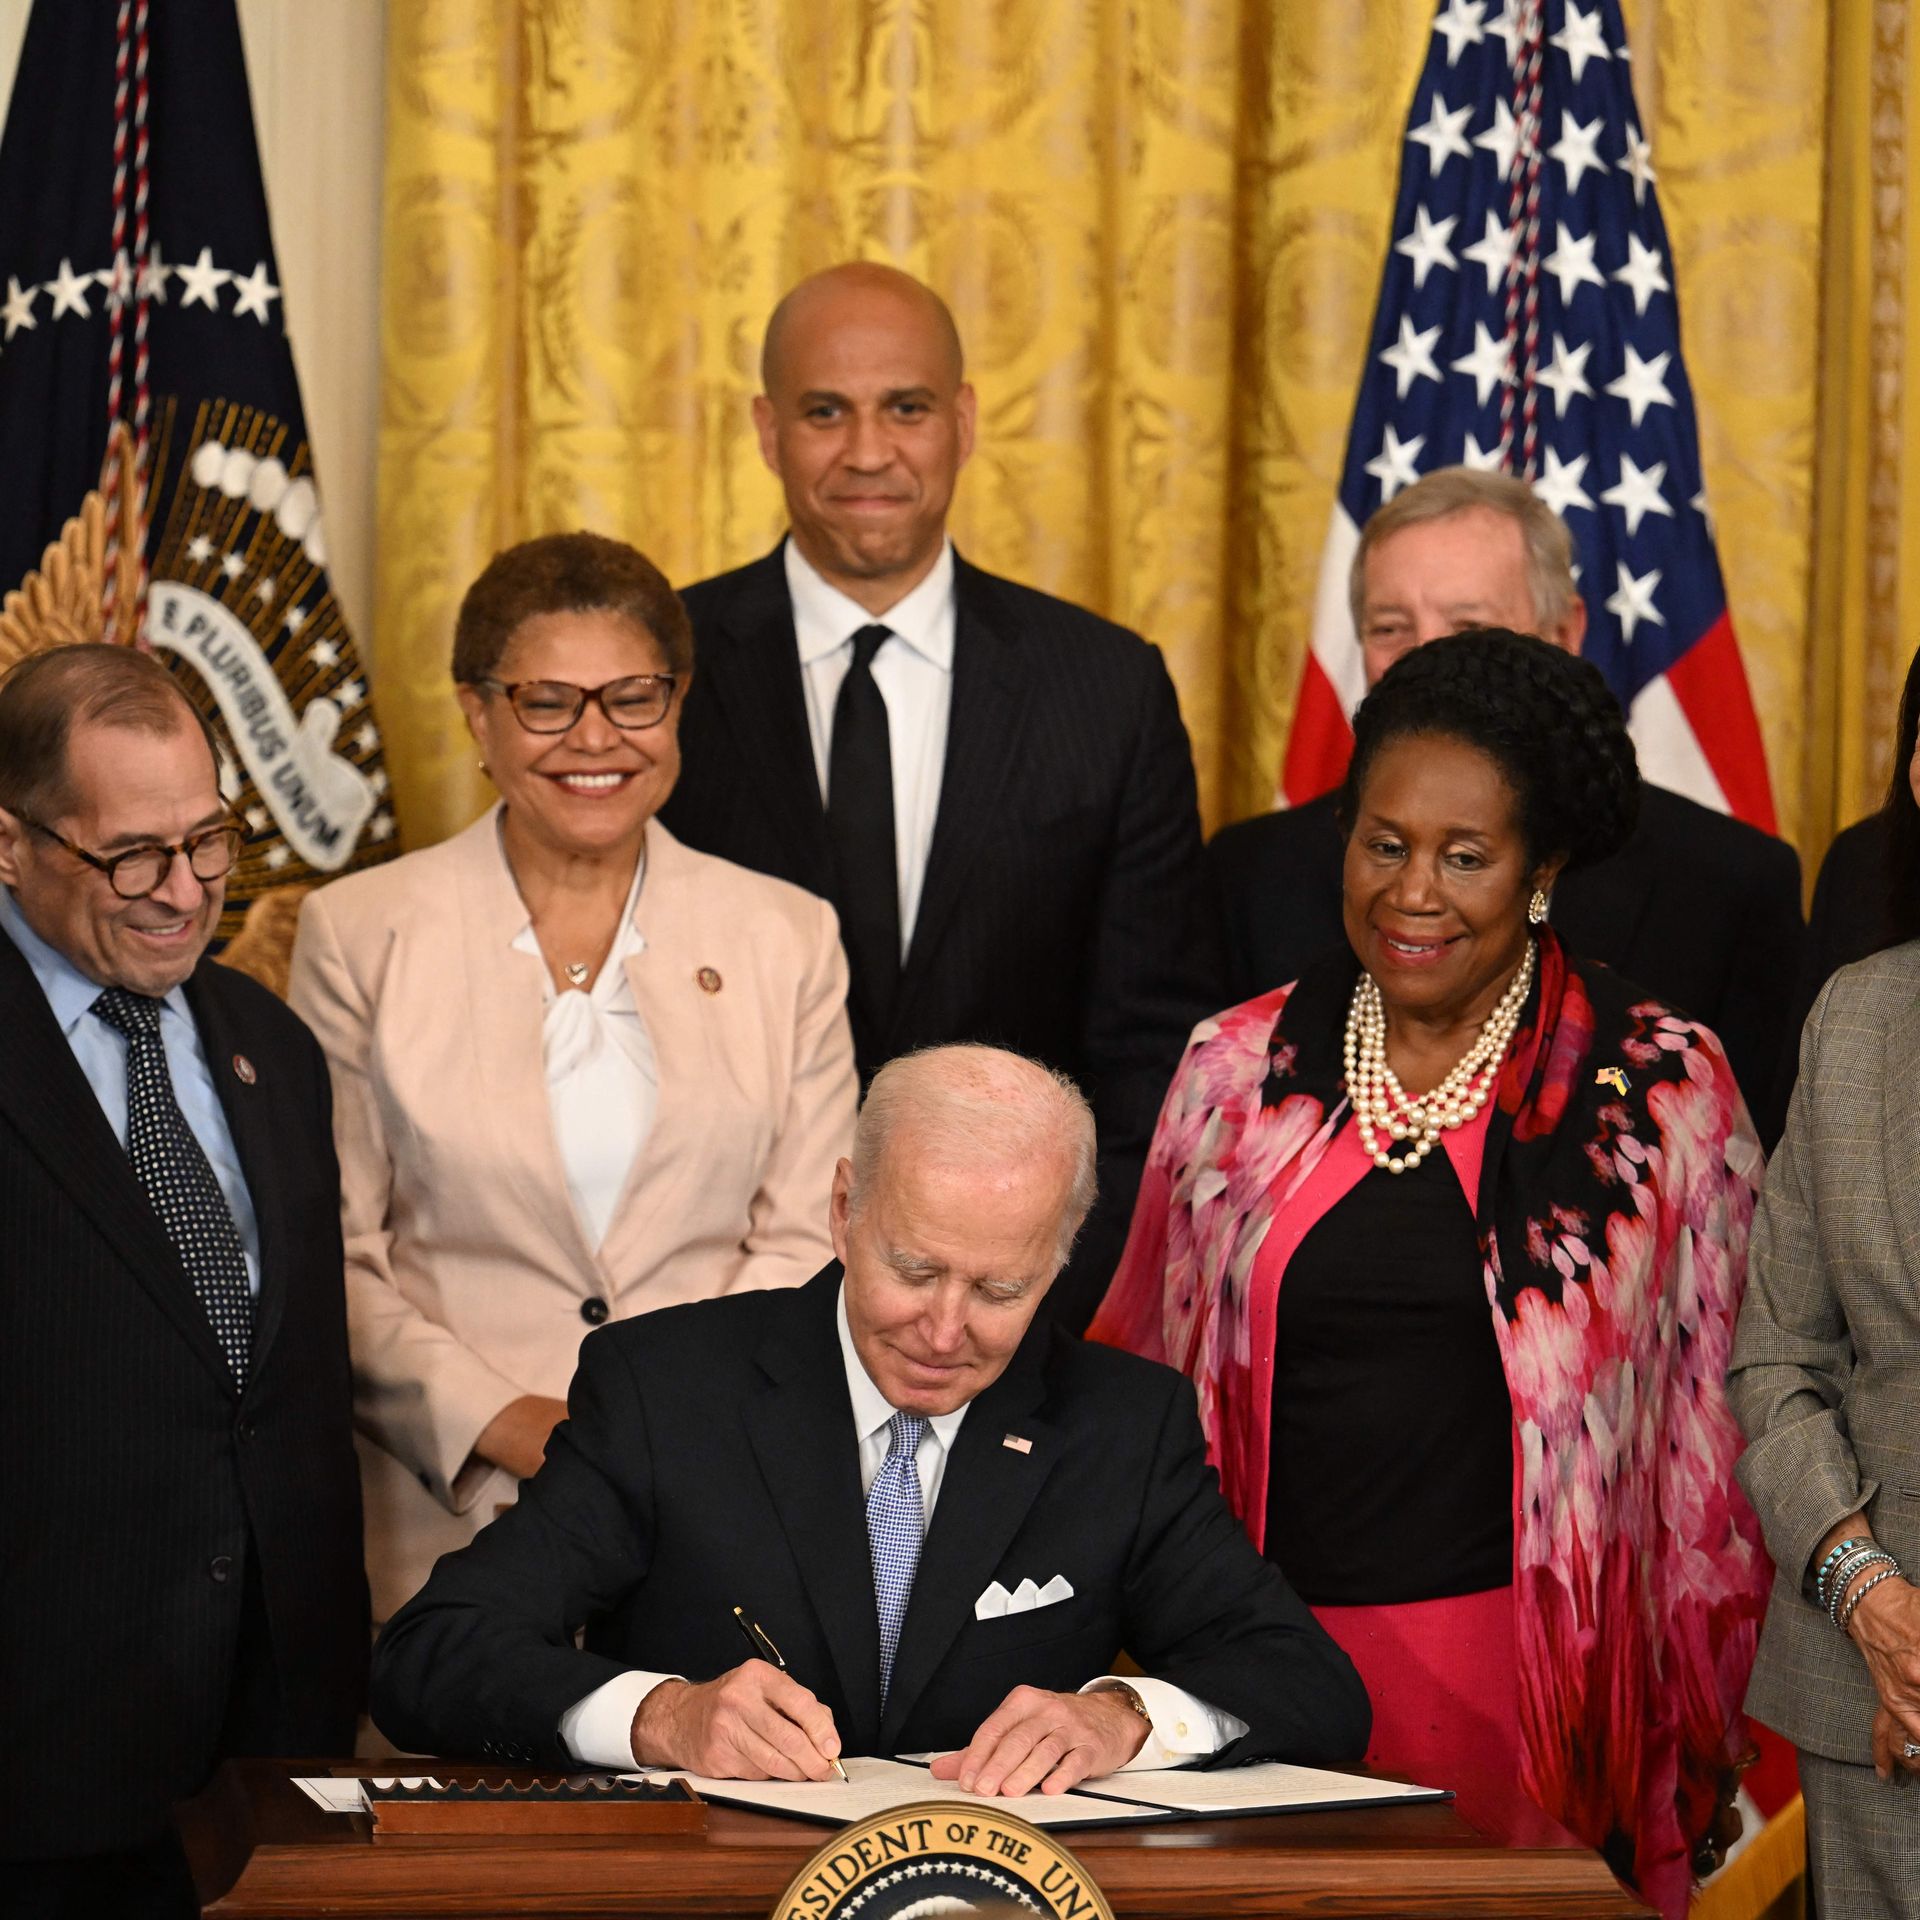 Photo of Joe Biden signing a bill at a desk while people stand around him smiling